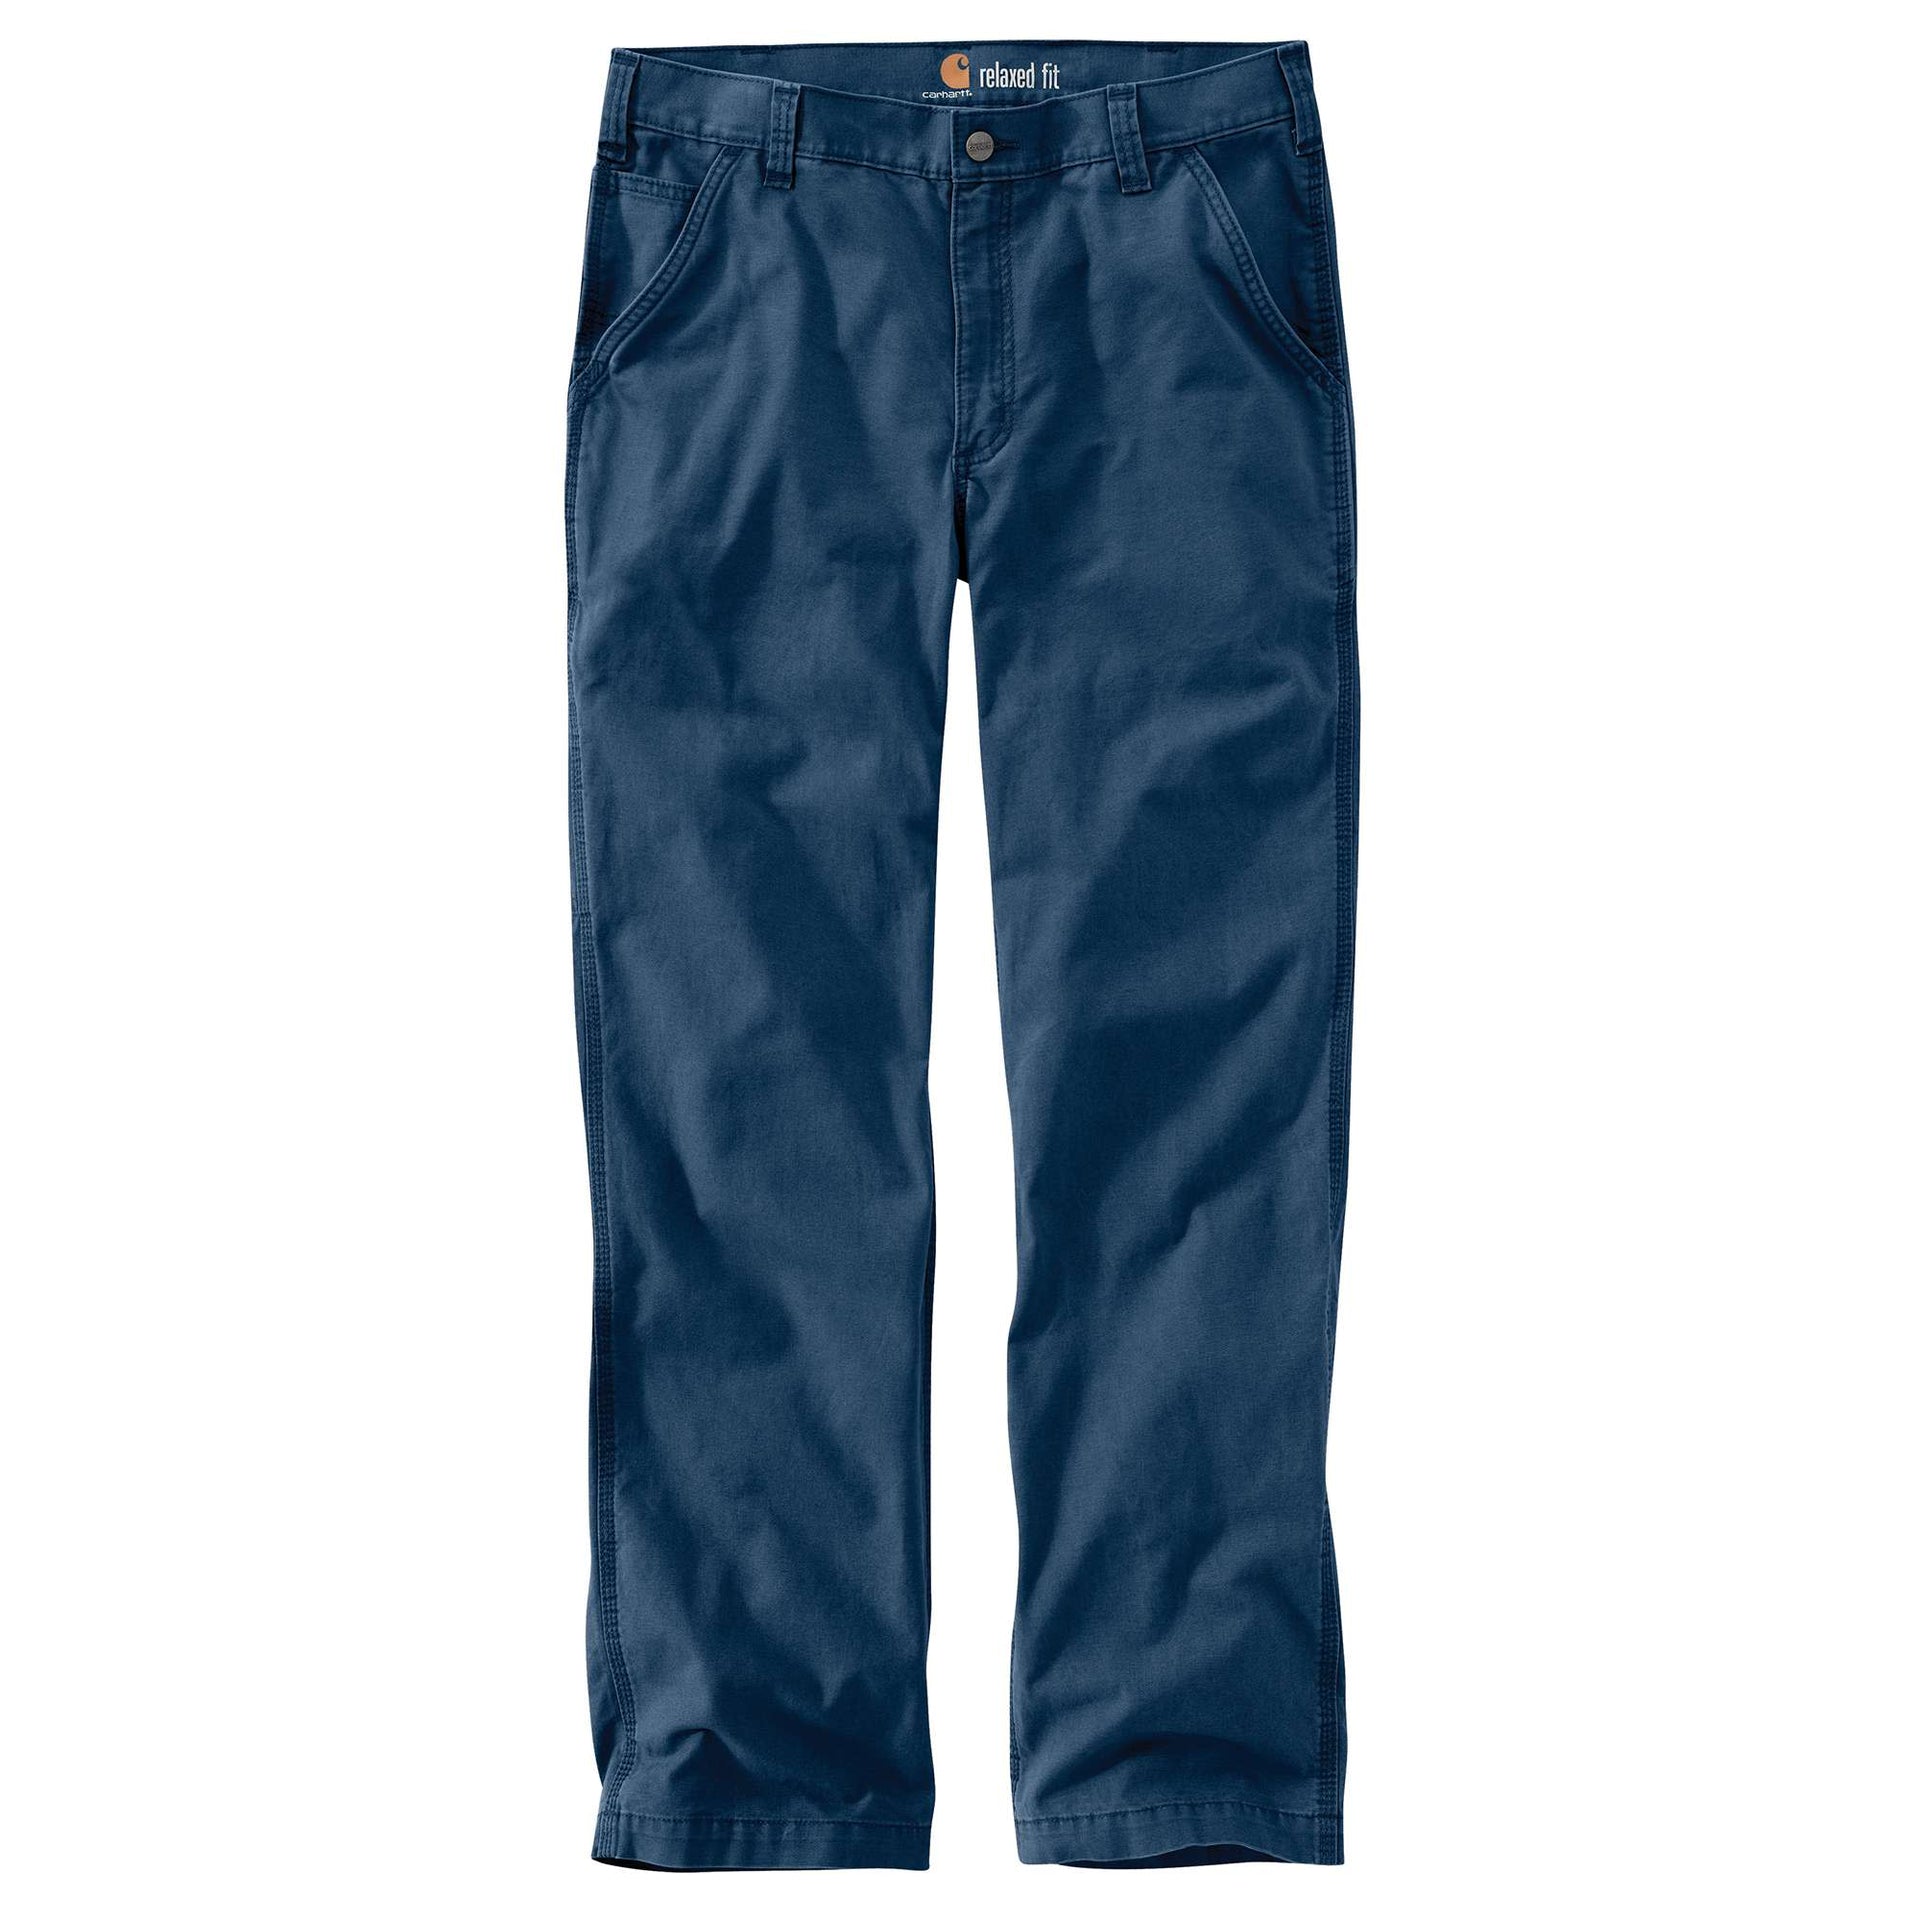 CARHARTT 102291 - Rugged Flex Relaxed Fit Canvas Work Pant - Navy